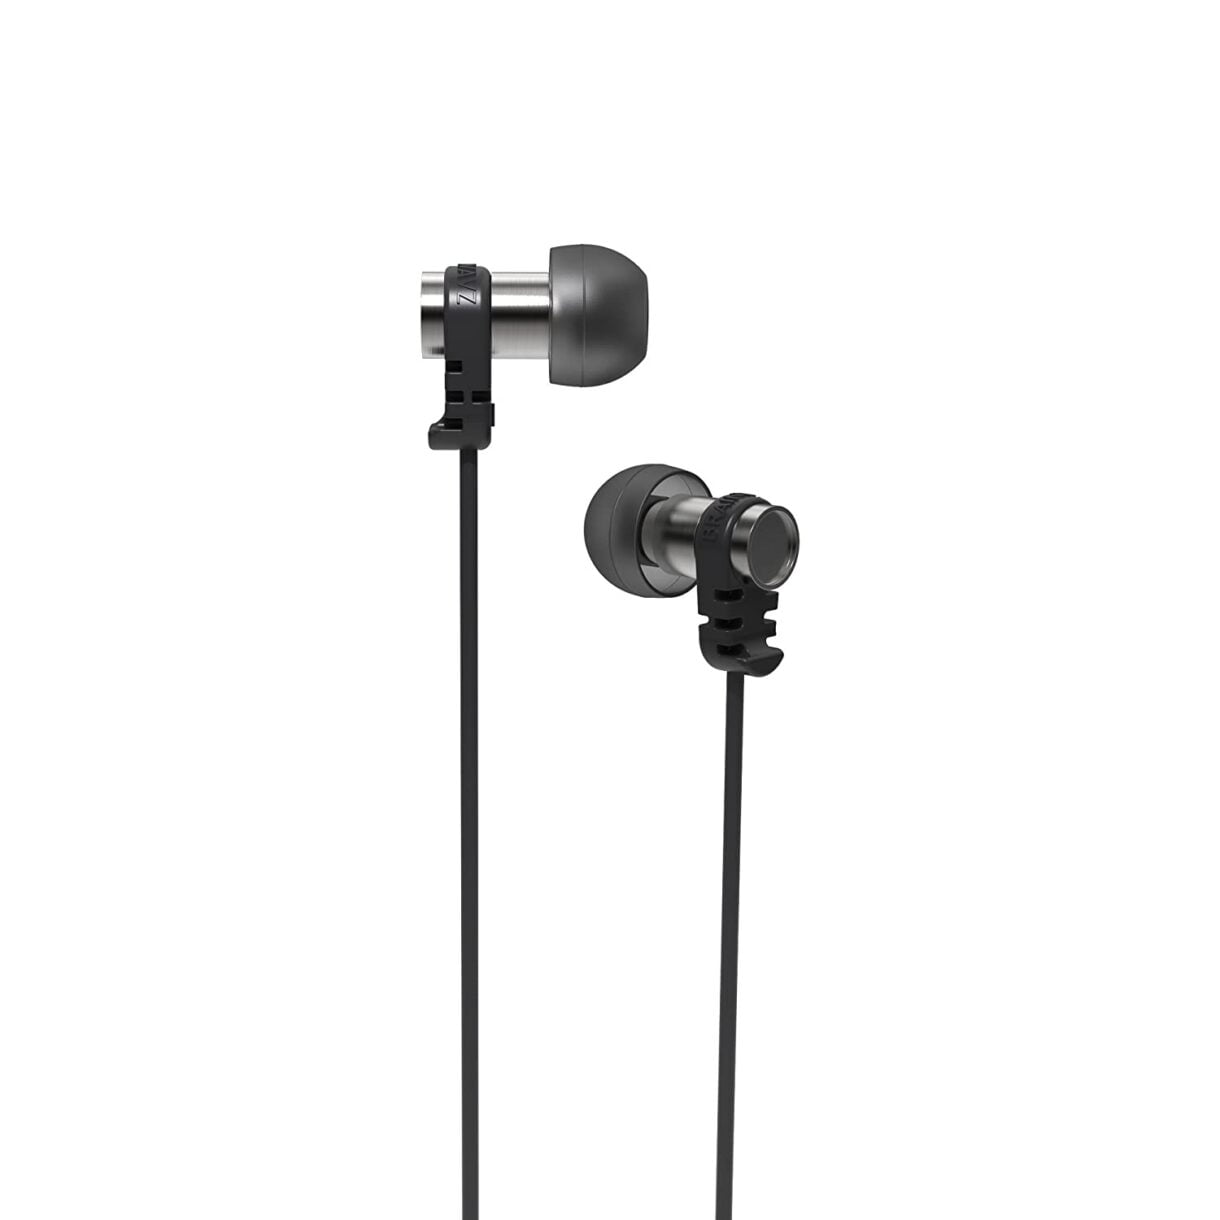 Brainwavz Omega IEM Noise Isolating Earphones with Microphone & Remote for iOS & Android Devices